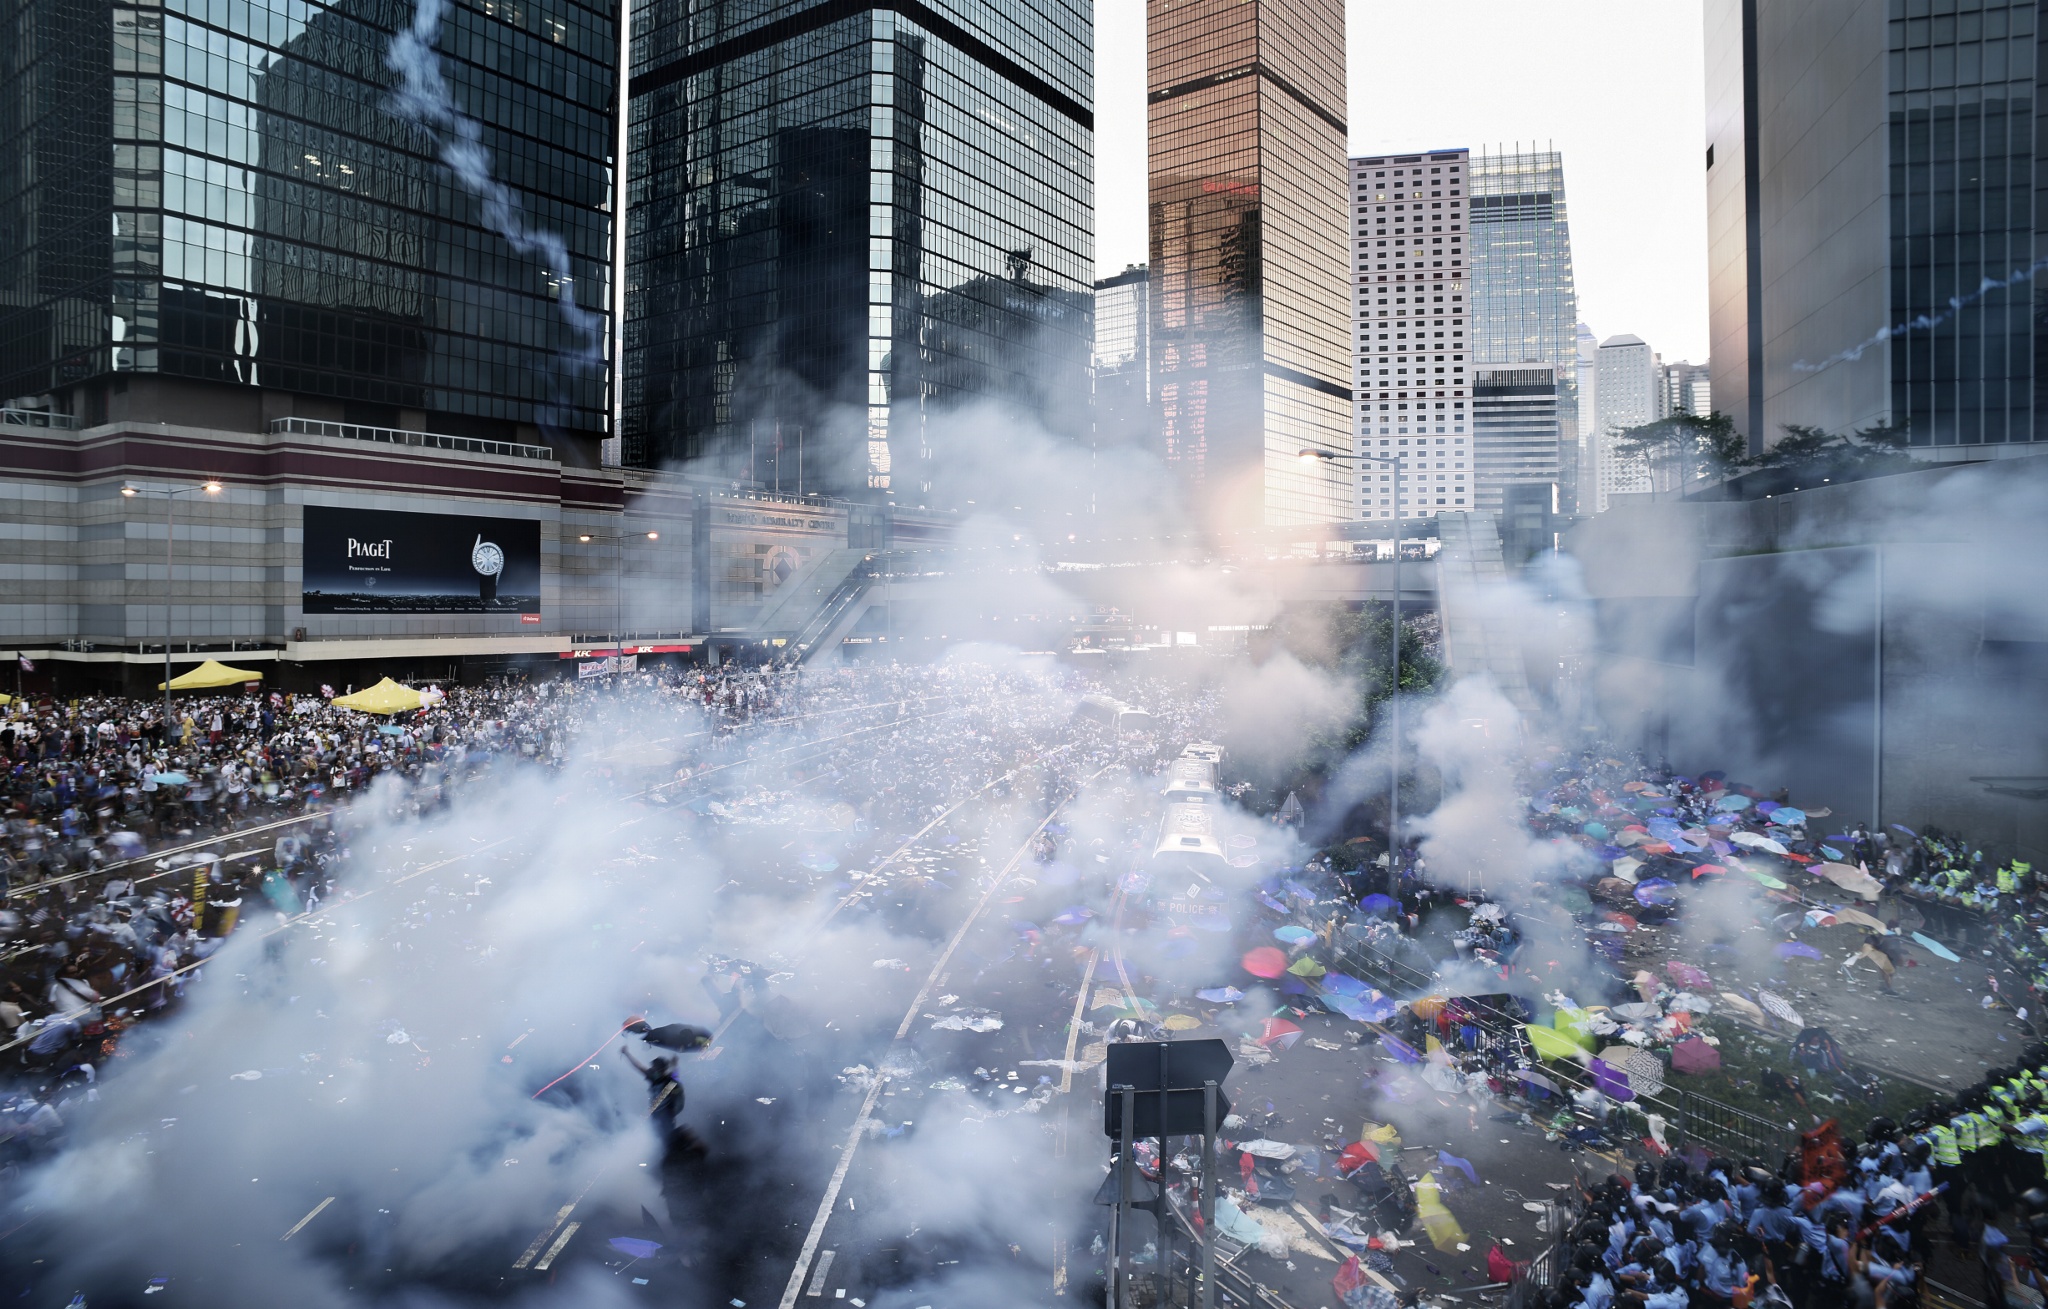 40 Gripping Photos Of The Civil Unrest In Hong Kong